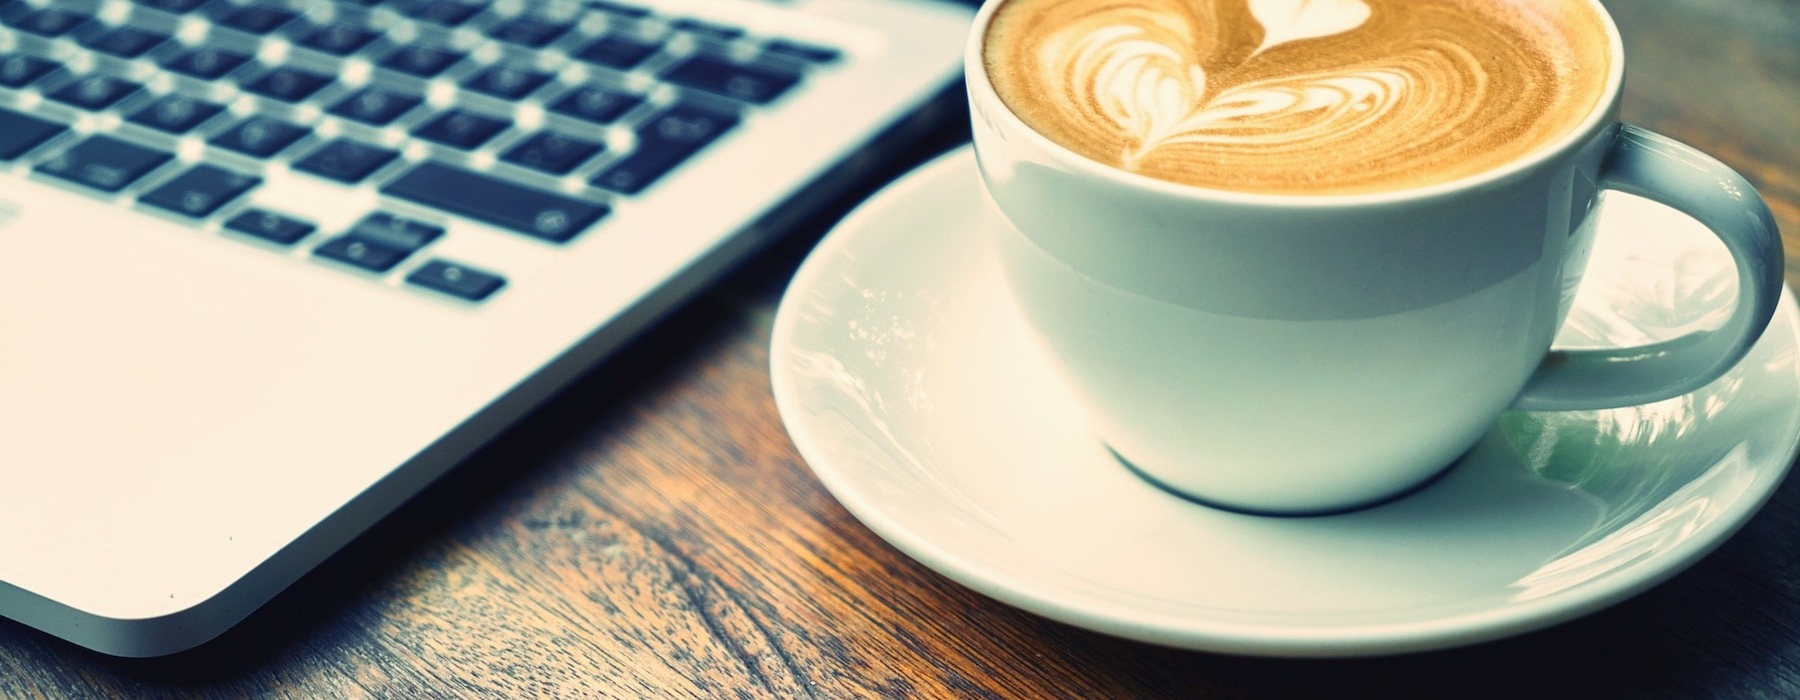 lifestyle image of a laptop and a mug of coffee on a table